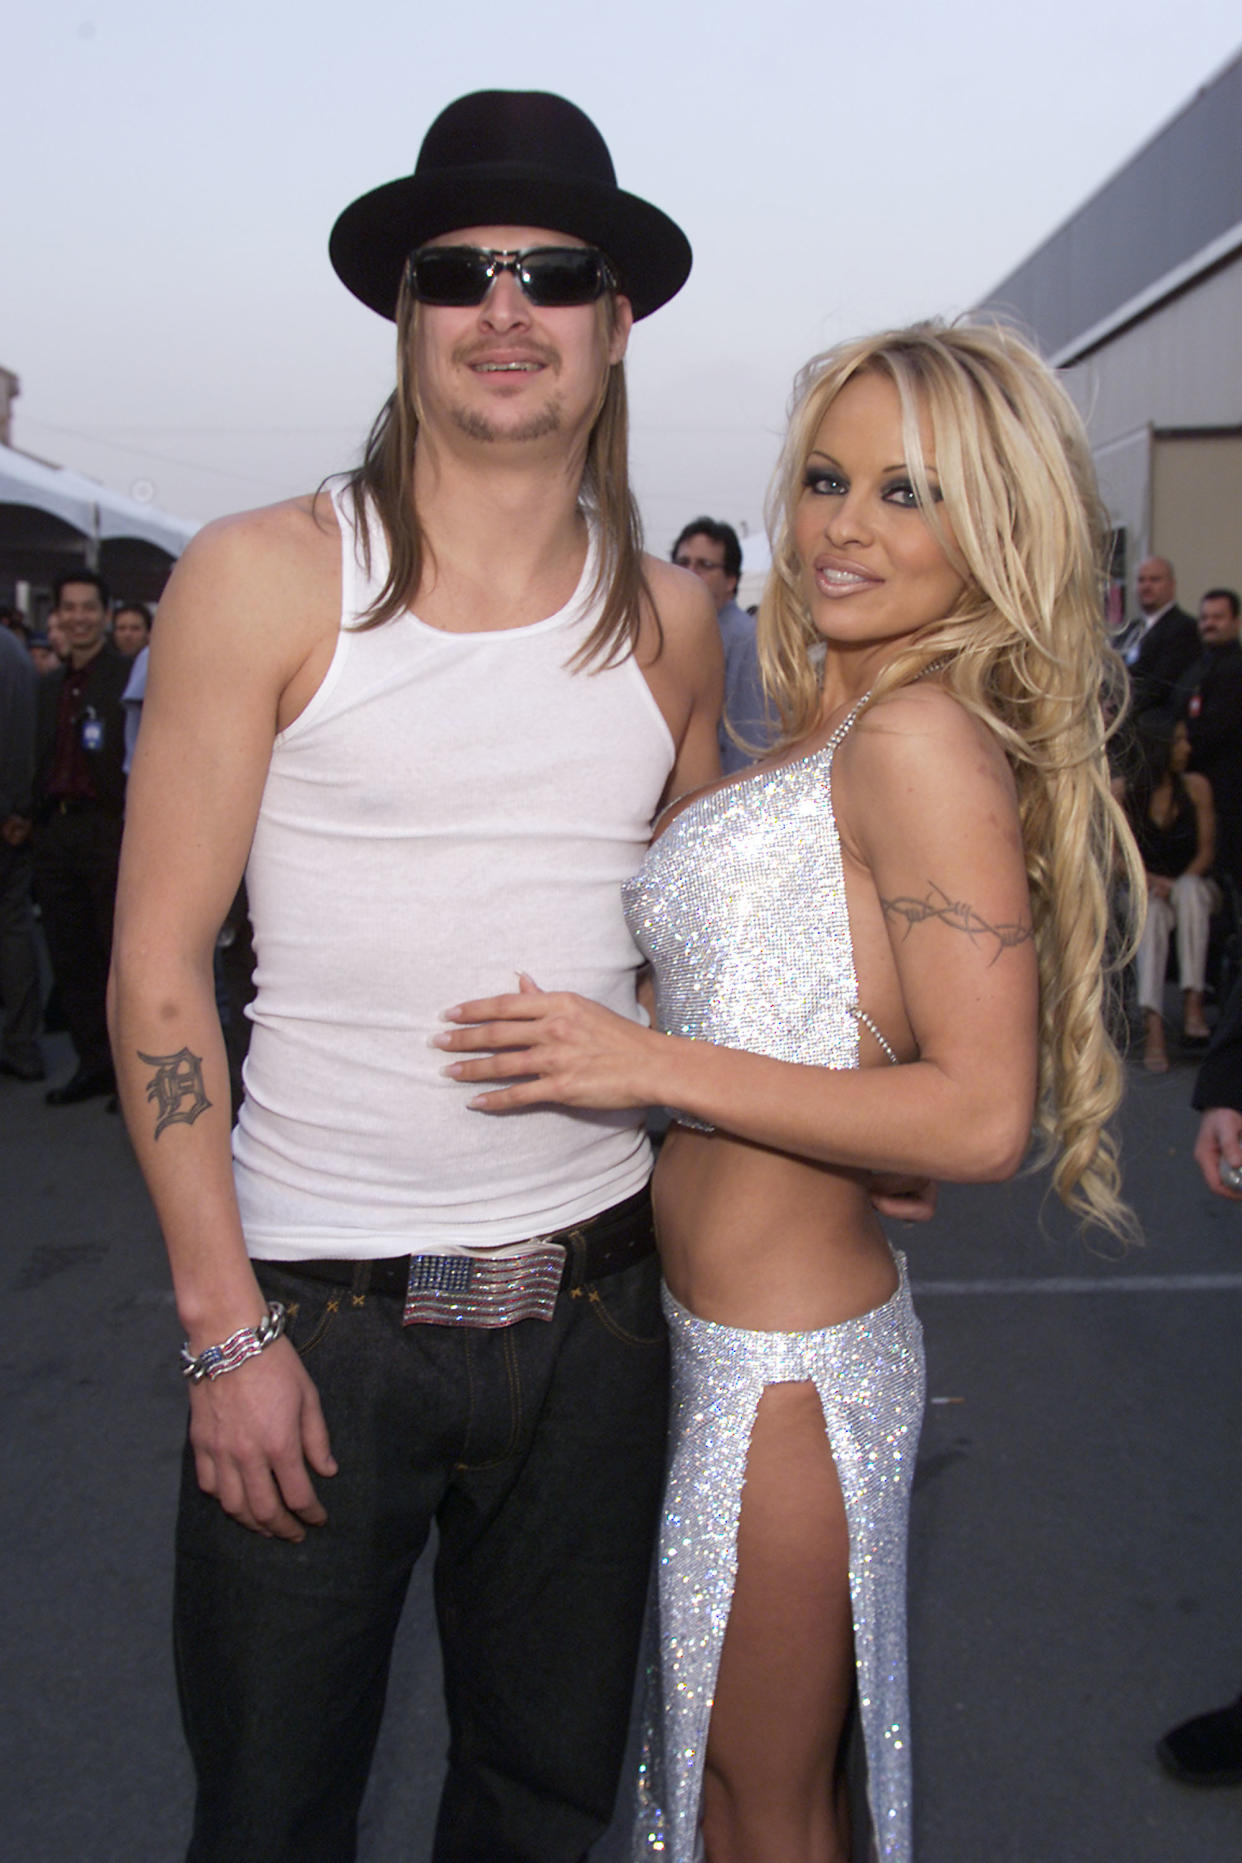 Kid Rock and Pamela Anderson arrive at the 29th Annual American Music Awards at the Shrine Auditorium in Los Angeles Wednesdsay, January 9, 2002. Photo by Frank Micelotta/ABC/ImageDirect